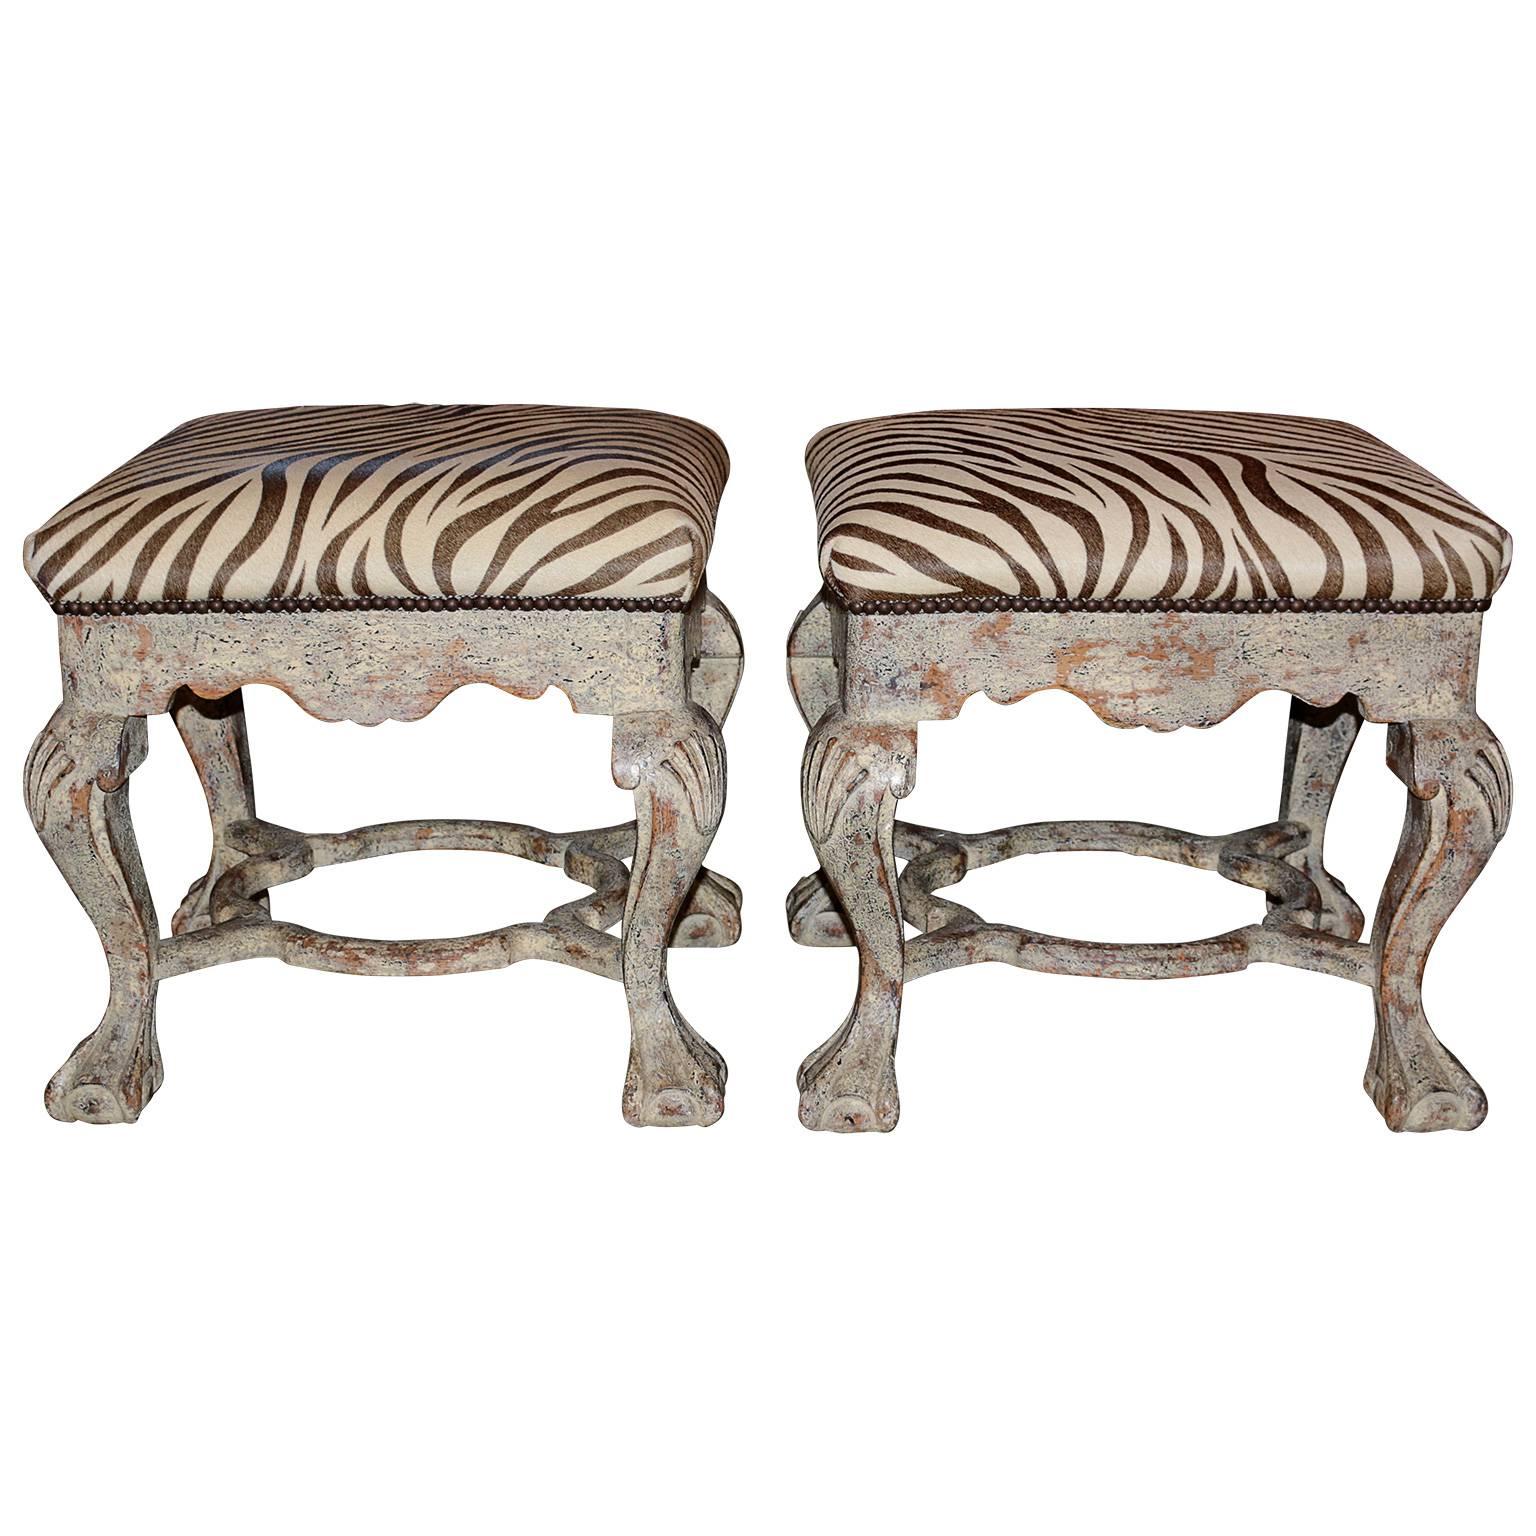 Pair of hand-carved Itaian zebra printed cow hide foot stools. The cowhide zebra print is in great condition being held by nailheads. The hand-carved leg have a carved in clam shell with eagle ball foot at the base. 

Contact us for an accurate